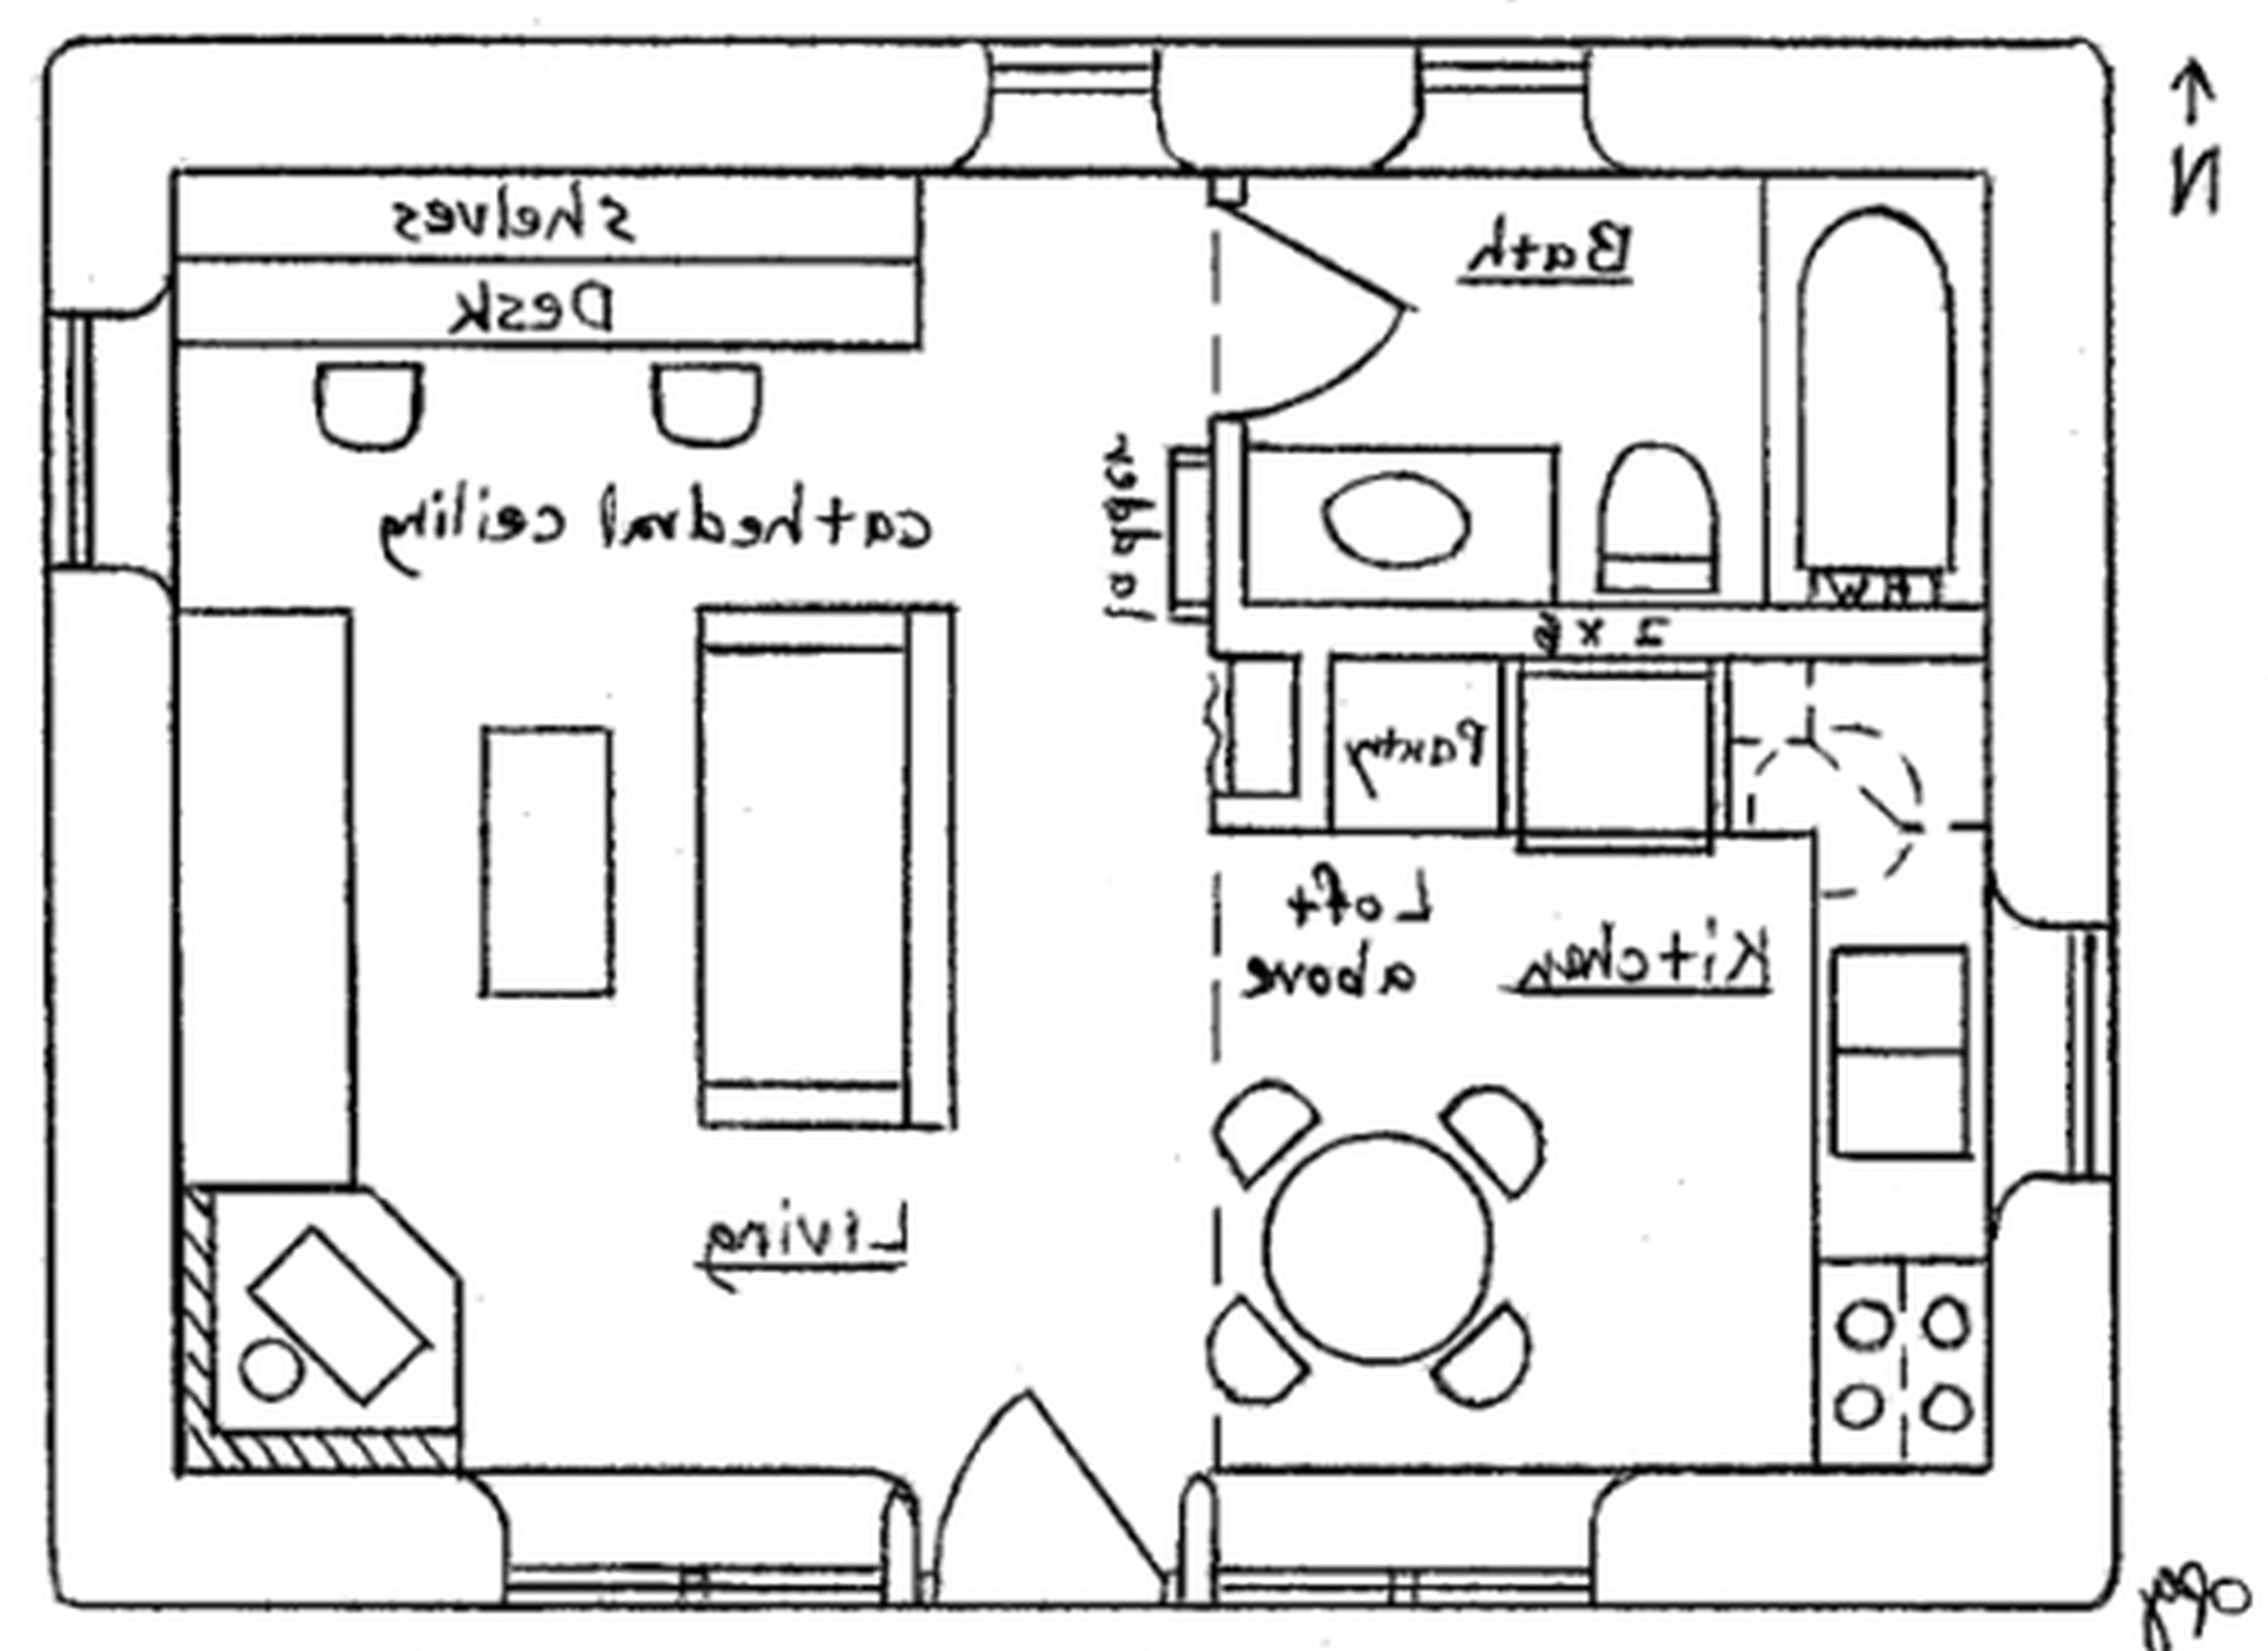 How To Draw Interior House Plans - Design Talk